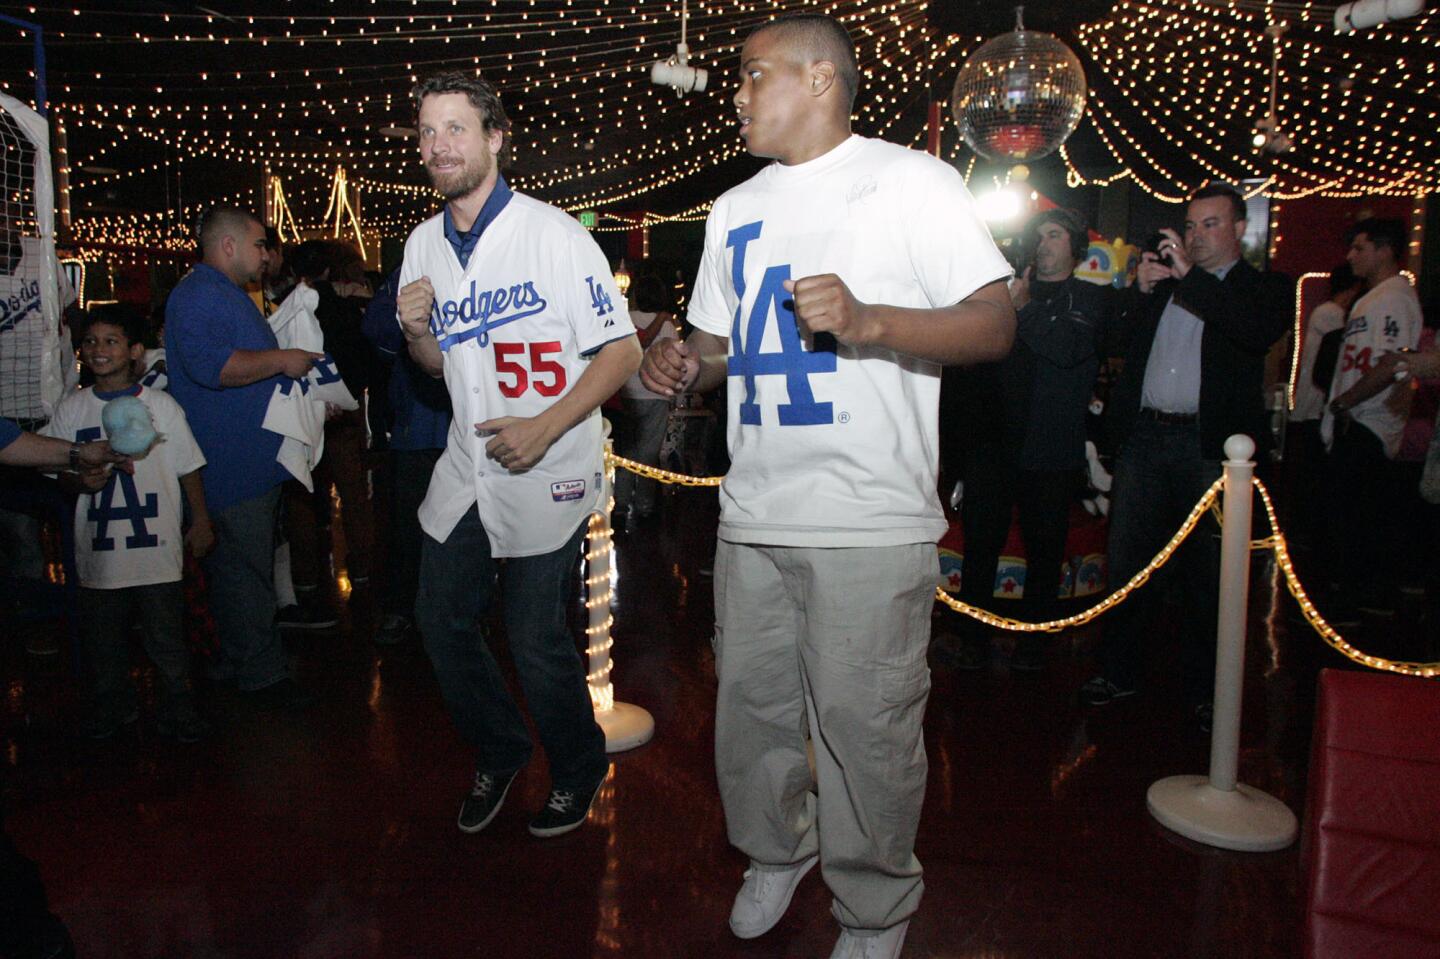 LA Dodgers' Matt Guerrier, from third left, dances with Jonathan McCowan during the Dodgers 10th annual Community Caravan "Pitching in the Community," which took place at Tobinworld in Glendale on Friday, January 25, 2013.